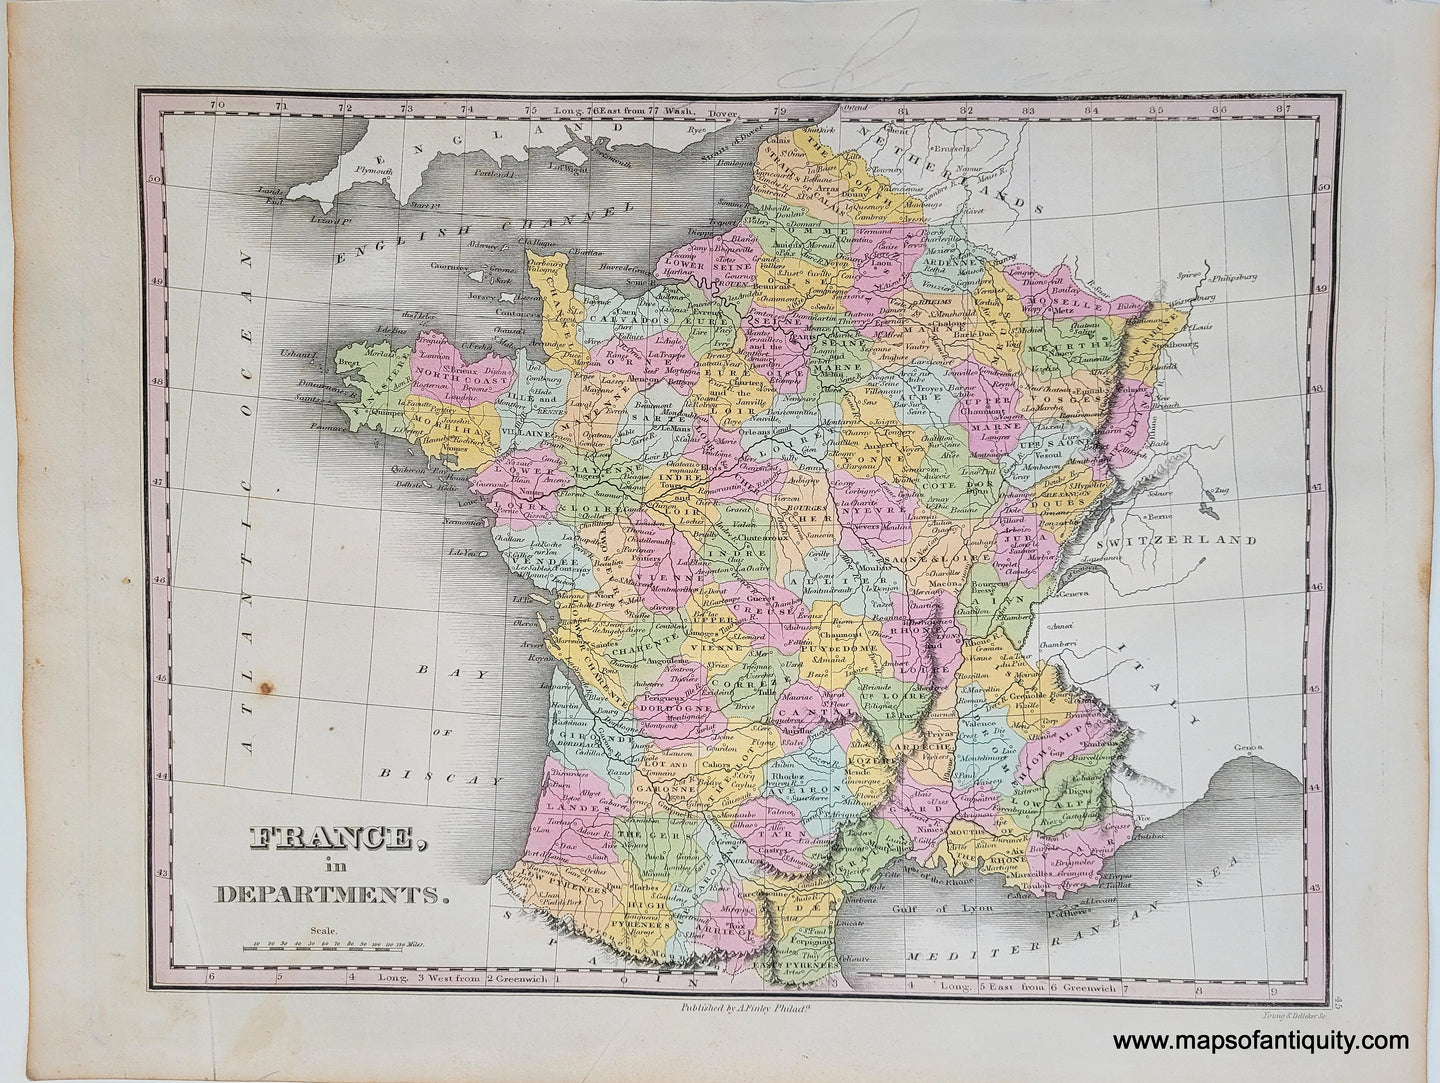 Antique-Hand-Colored-Map-France-in-Departments.-**********-Europe-France-1824-Anthony-Finley-Maps-Of-Antiquity